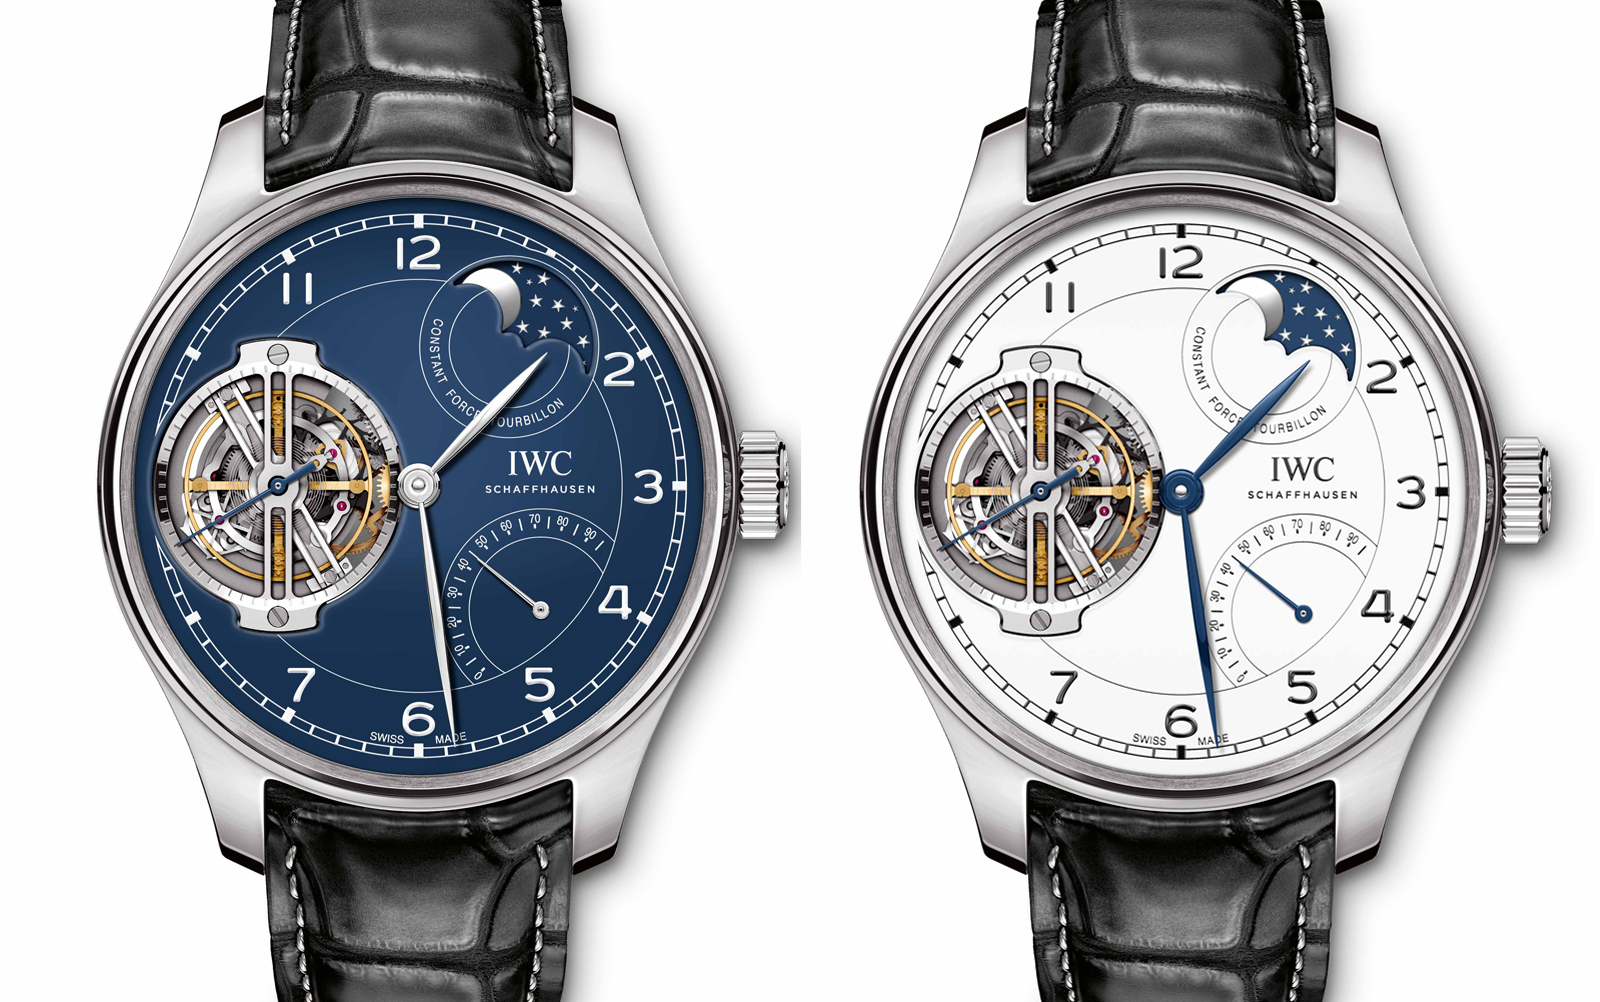 Portugieser Constant-Force Tourbillon Edition “150 Years”